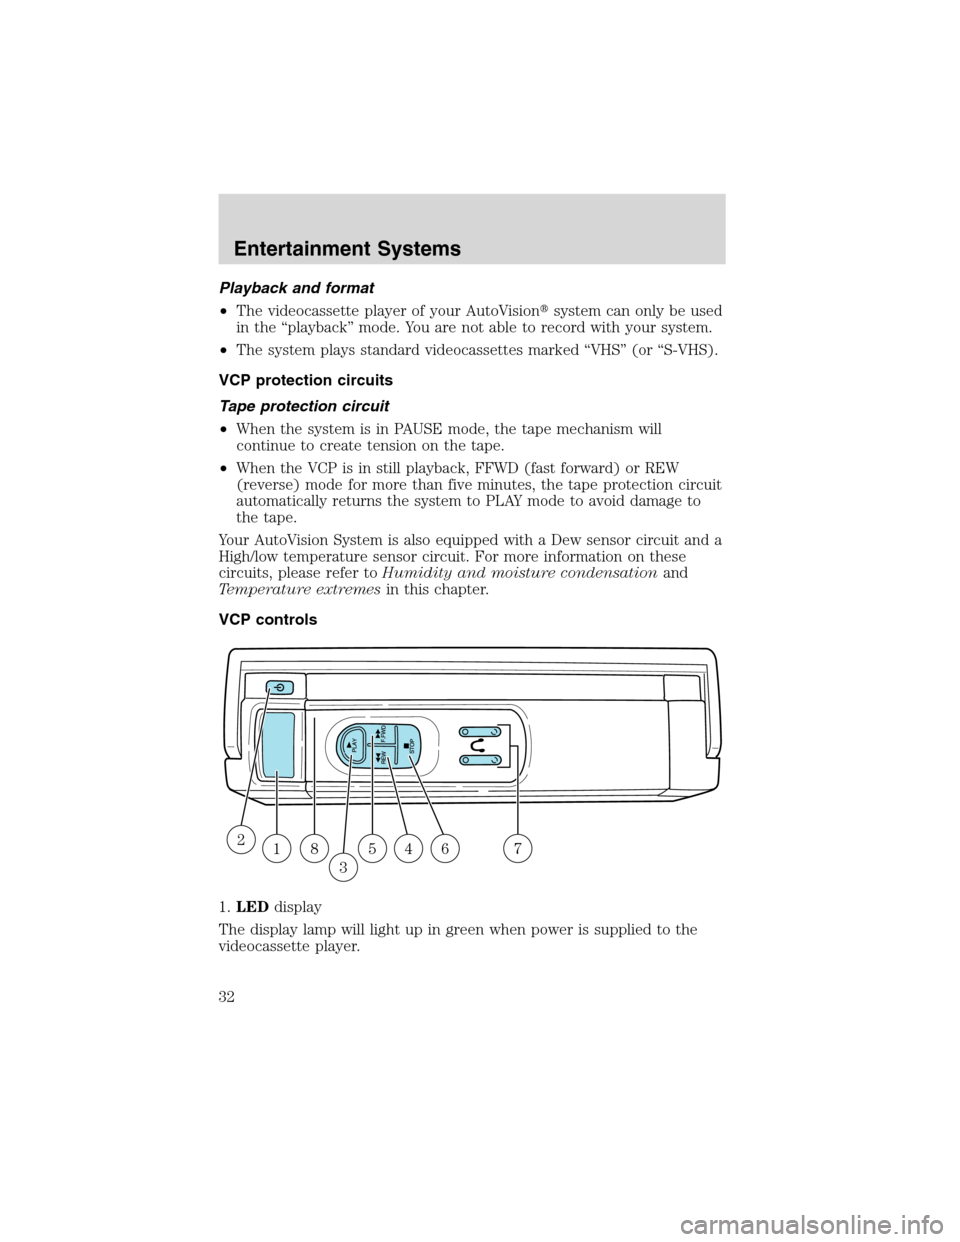 FORD E SERIES 2003 4.G Owners Manual Playback and format
•The videocassette player of your AutoVisionsystem can only be used
in the“playback”mode. You are not able to record with your system.
•The system plays standard videocass